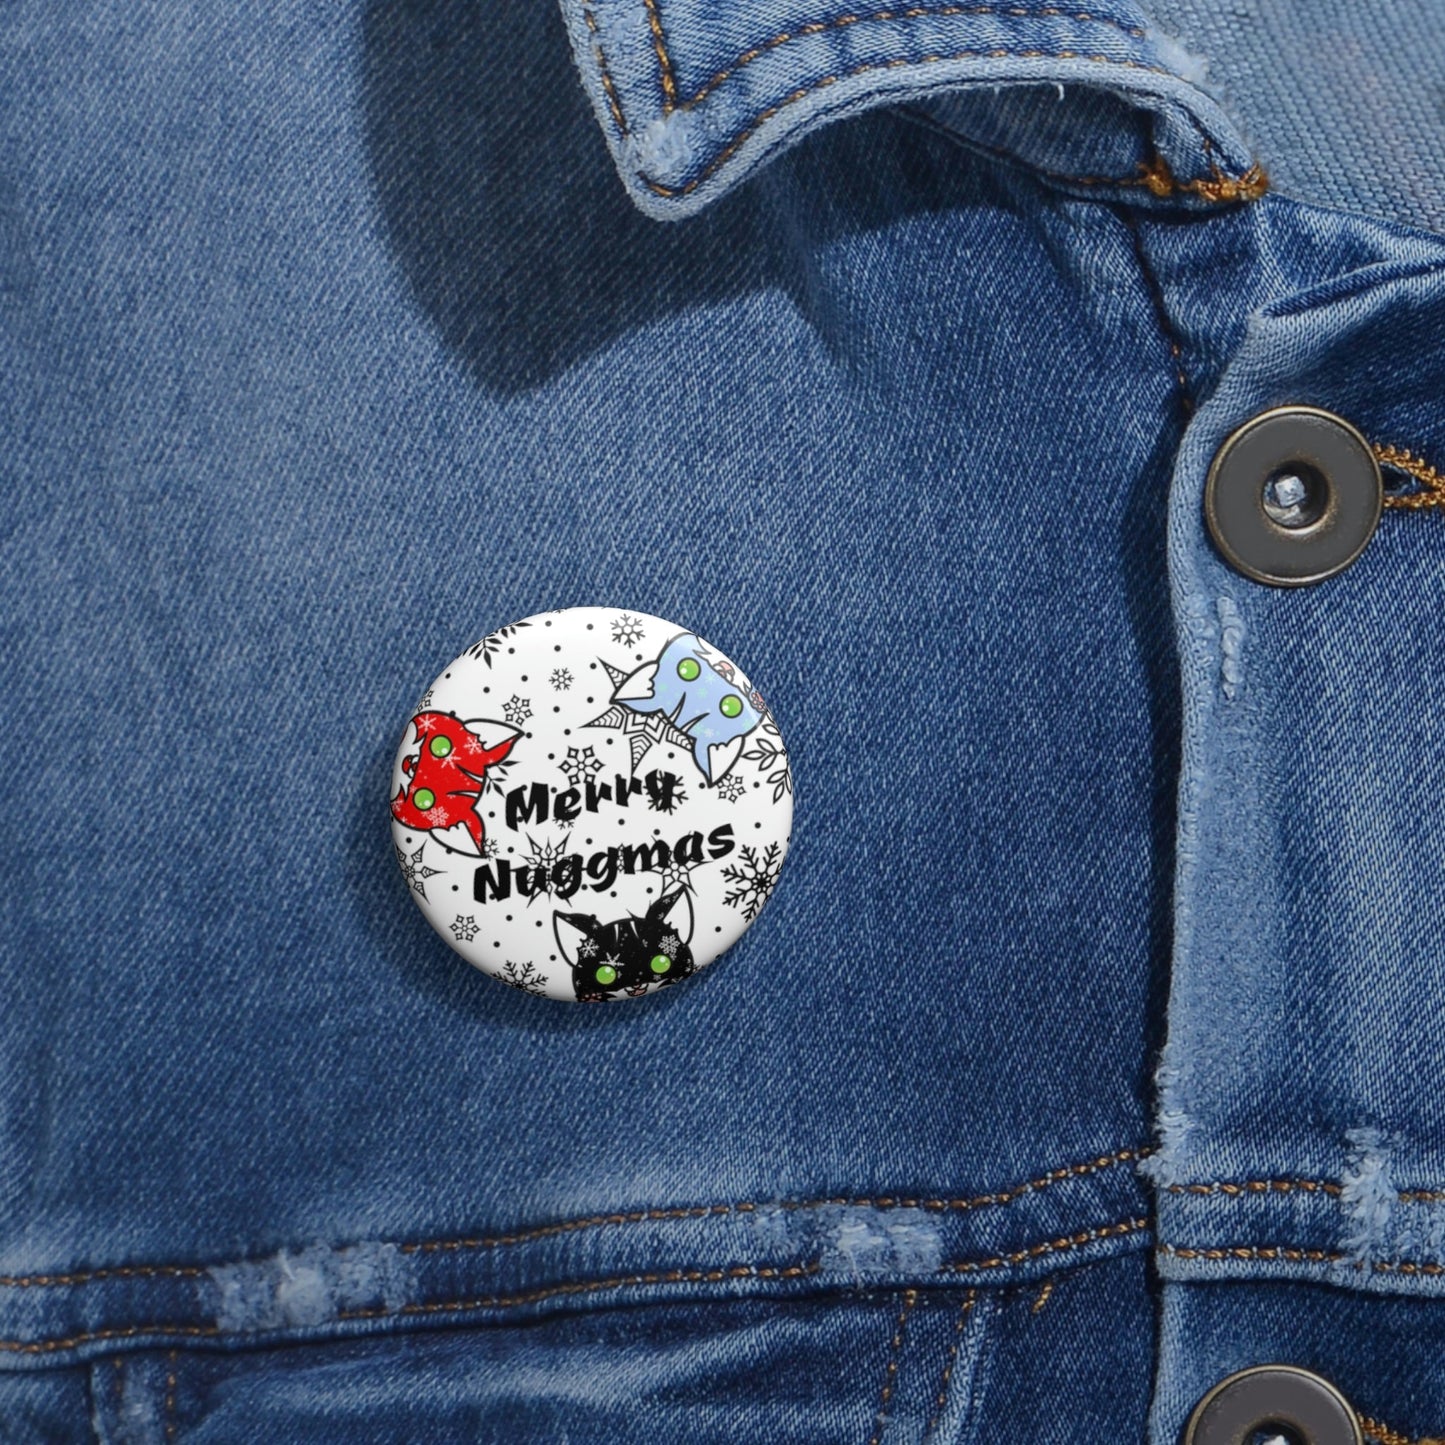 Stand out  with the  Nuggmas Pin Buttons  available at Hey Nugget. Grab yours today!